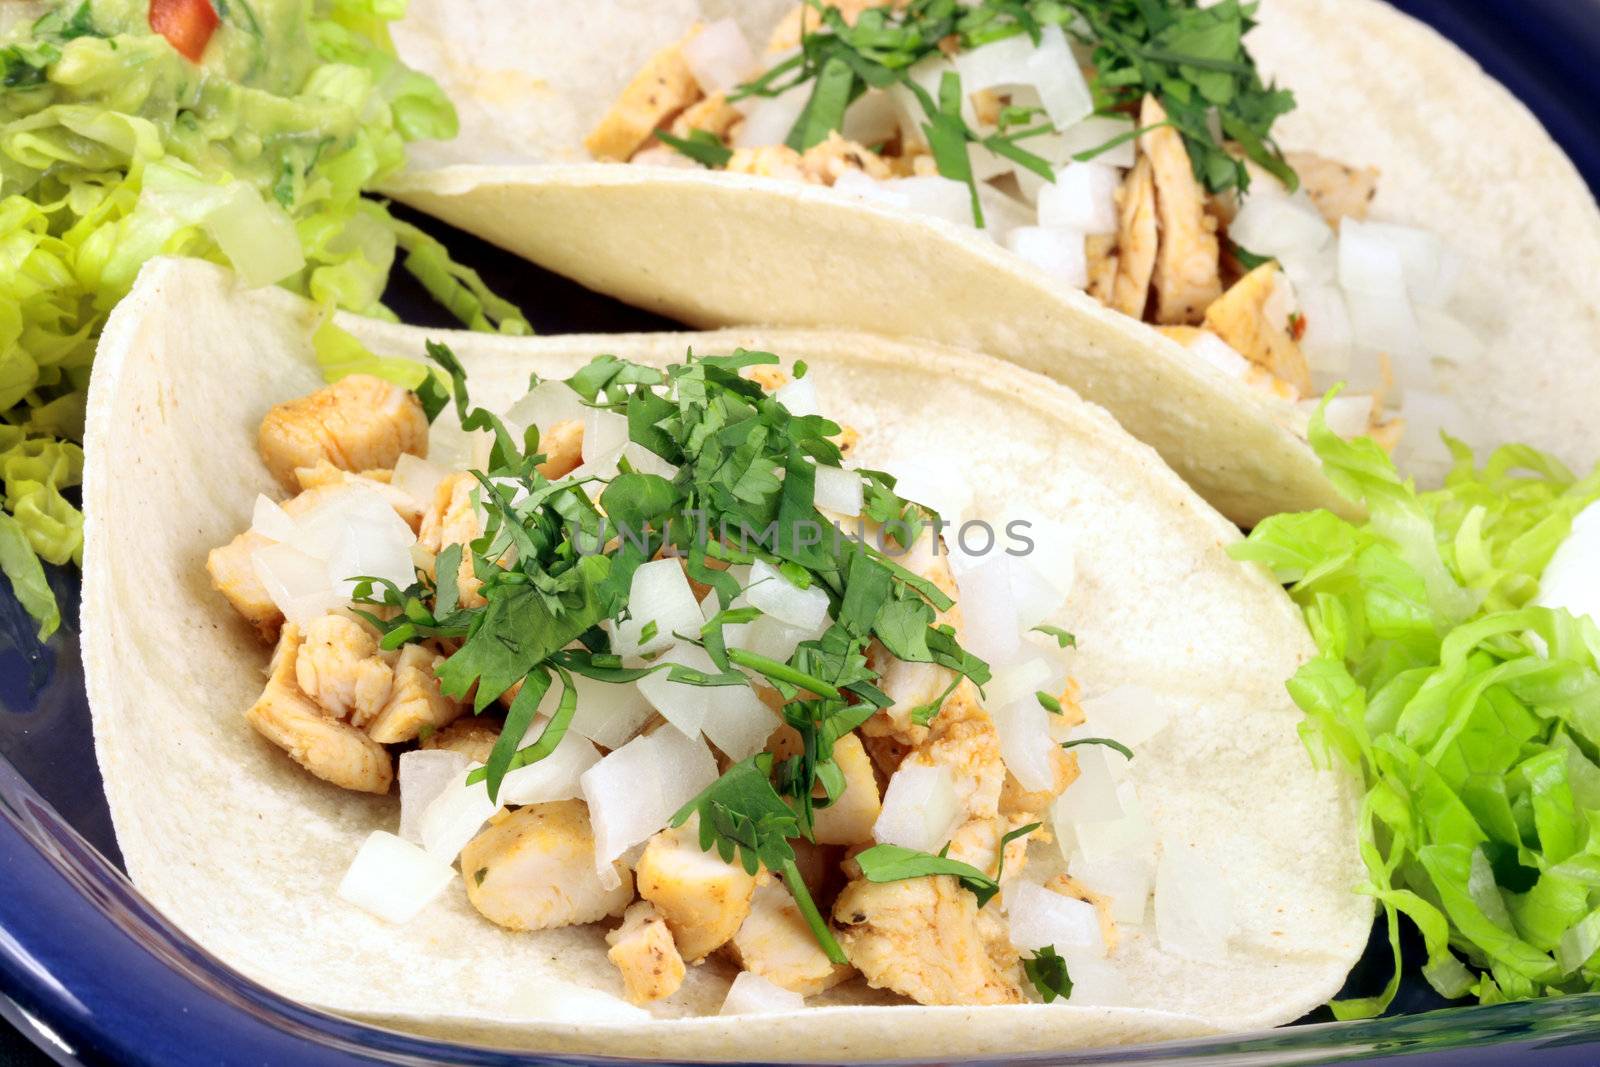 delicious chicken mexican tacos  perfect  meal or snack at any time  